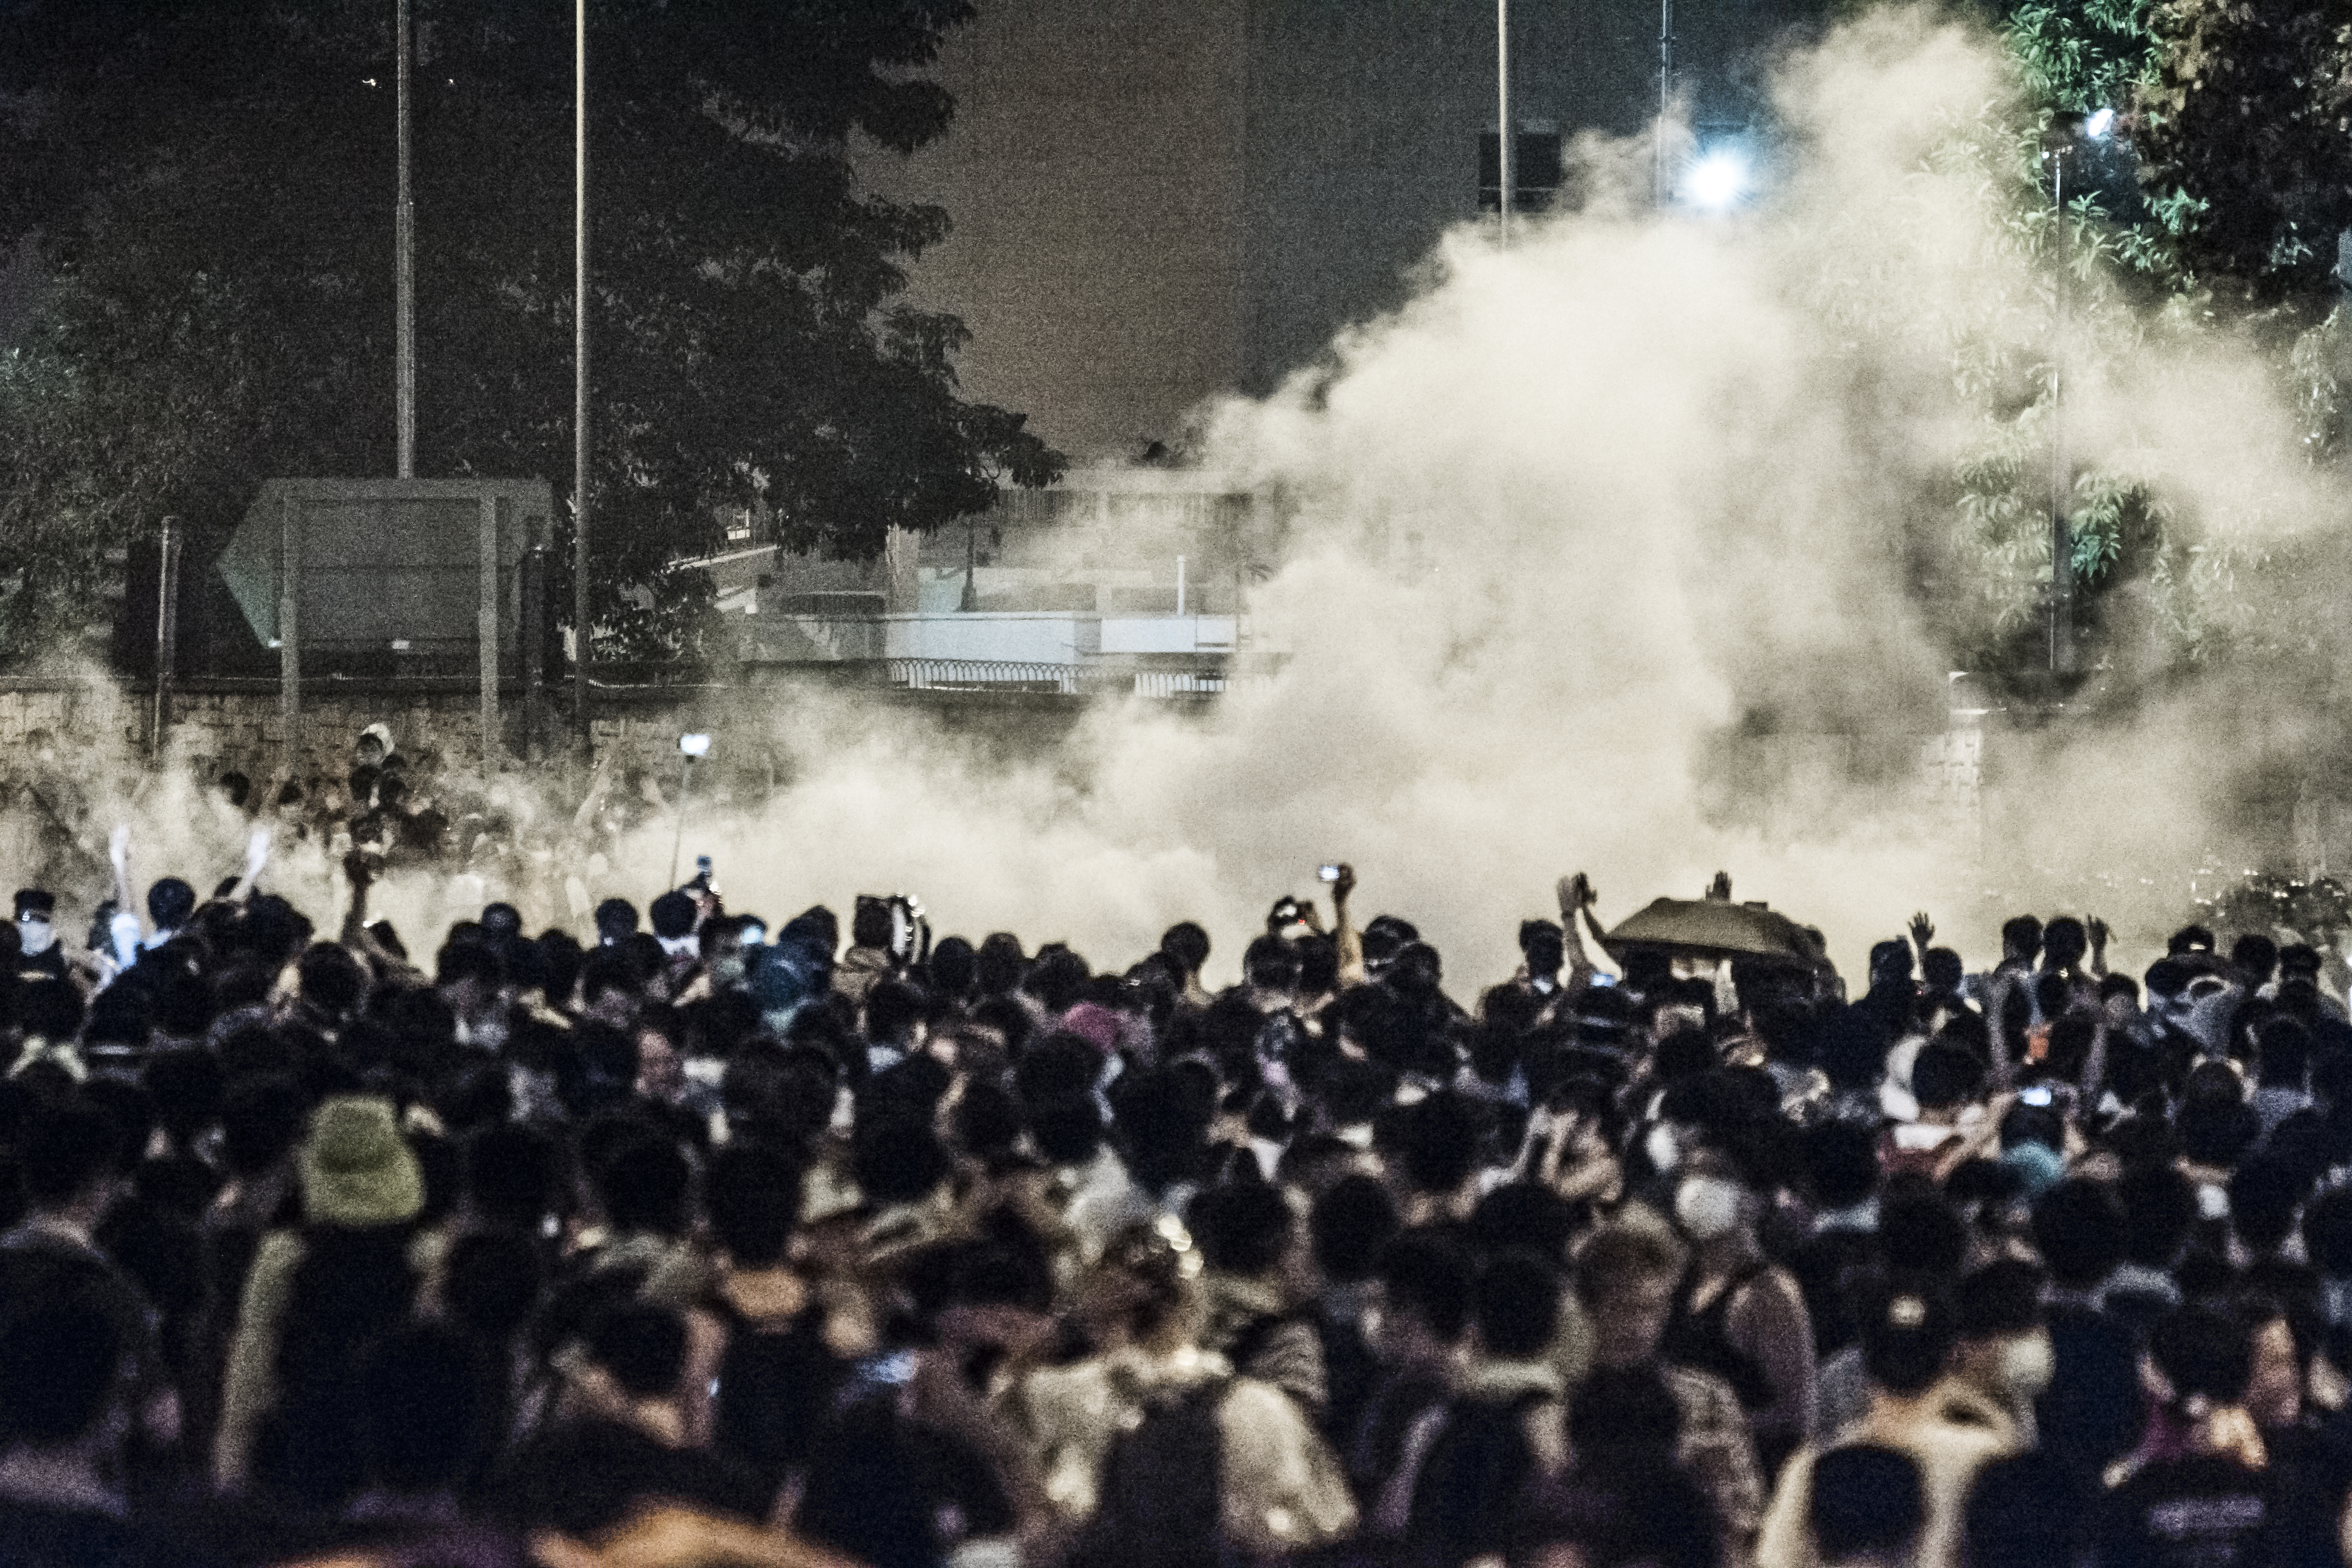 Tear gas used against Hong Kong protesters